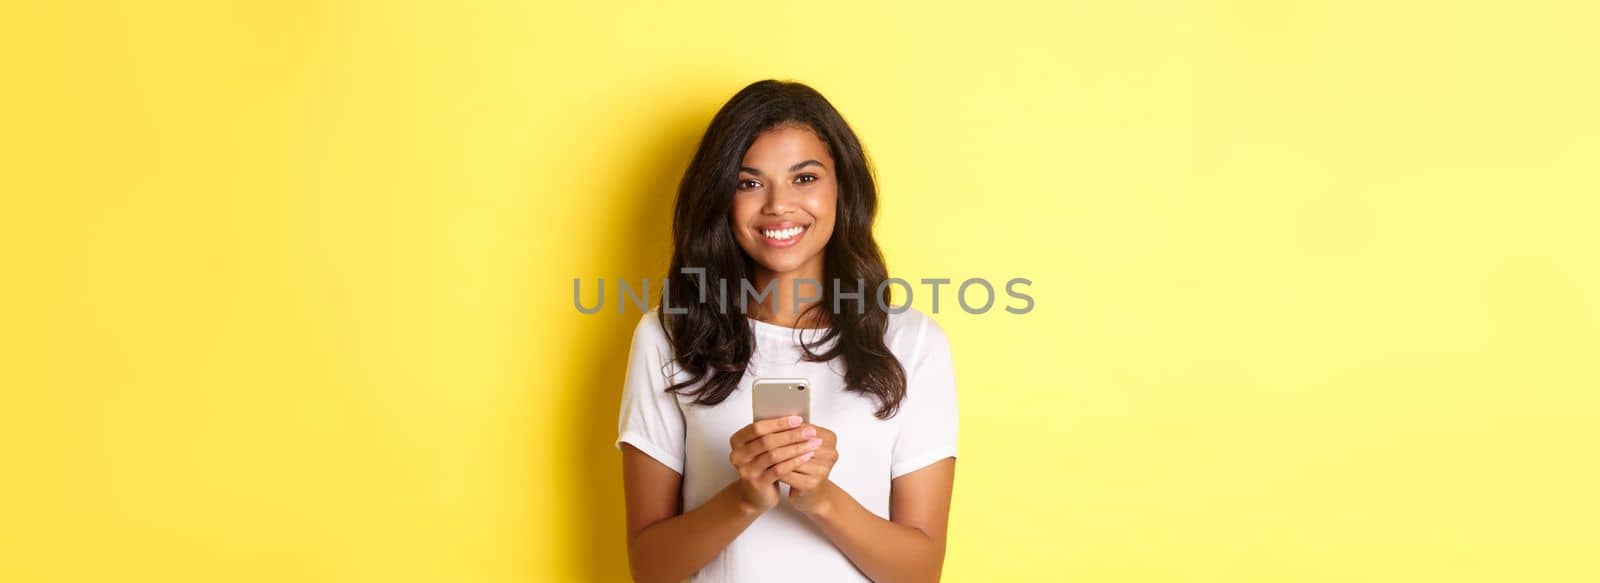 Image of modern african-american girl smiling, using mobile phone, standing over yellow background.